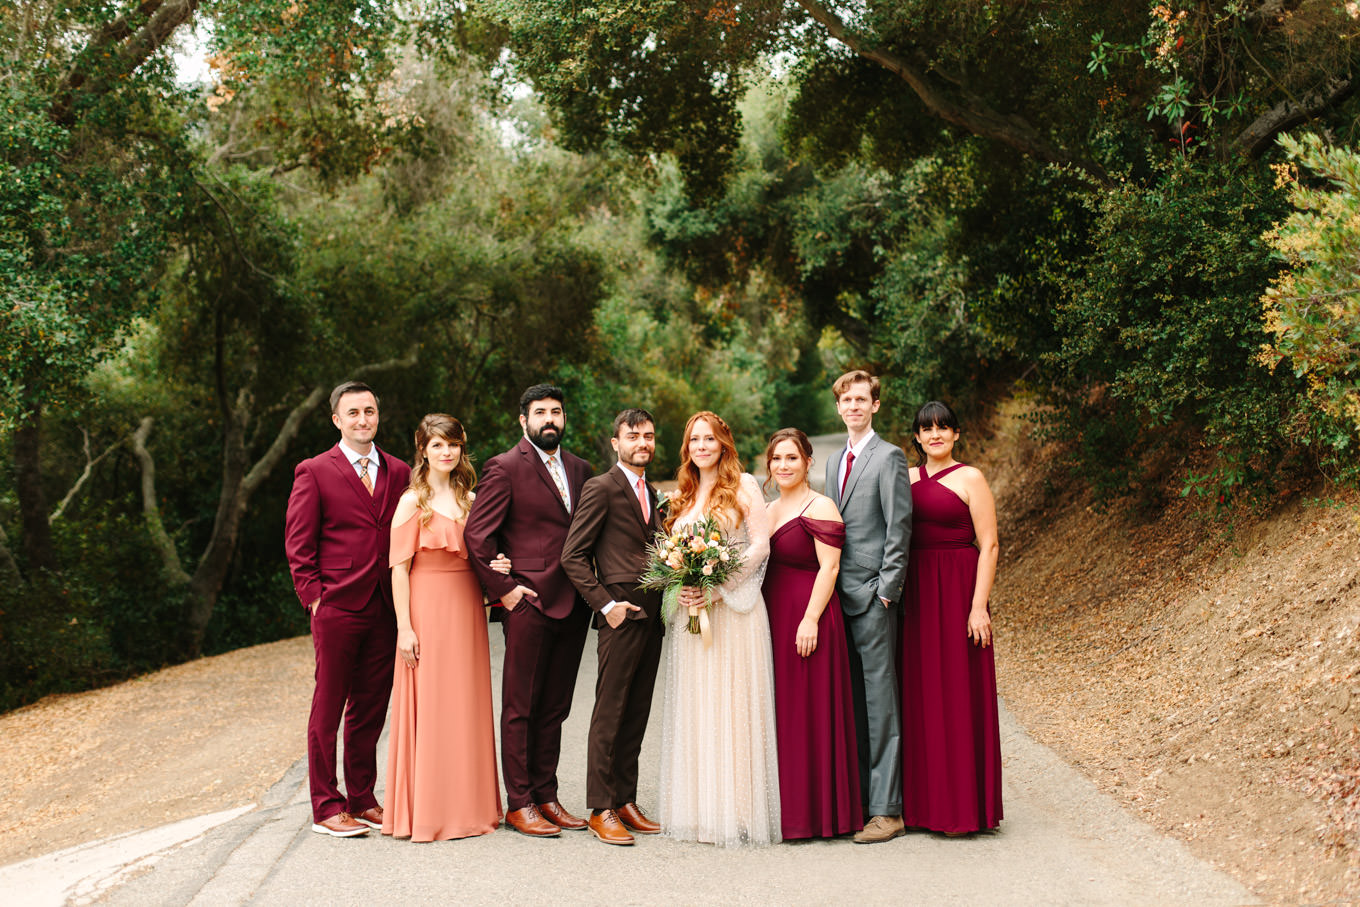 Wedding party at Inn of the Seventh Ray Topanga Canyon wedding Los Angeles Chinatown engagement session | Engagement, elopement, and wedding photography roundup of Mary Costa’s favorite images from 2020 | Colorful and elevated photography for fun-loving couples in Southern California | #2020wedding #elopement #weddingphoto #weddingphotography #microwedding   Source: Mary Costa Photography | Los Angeles